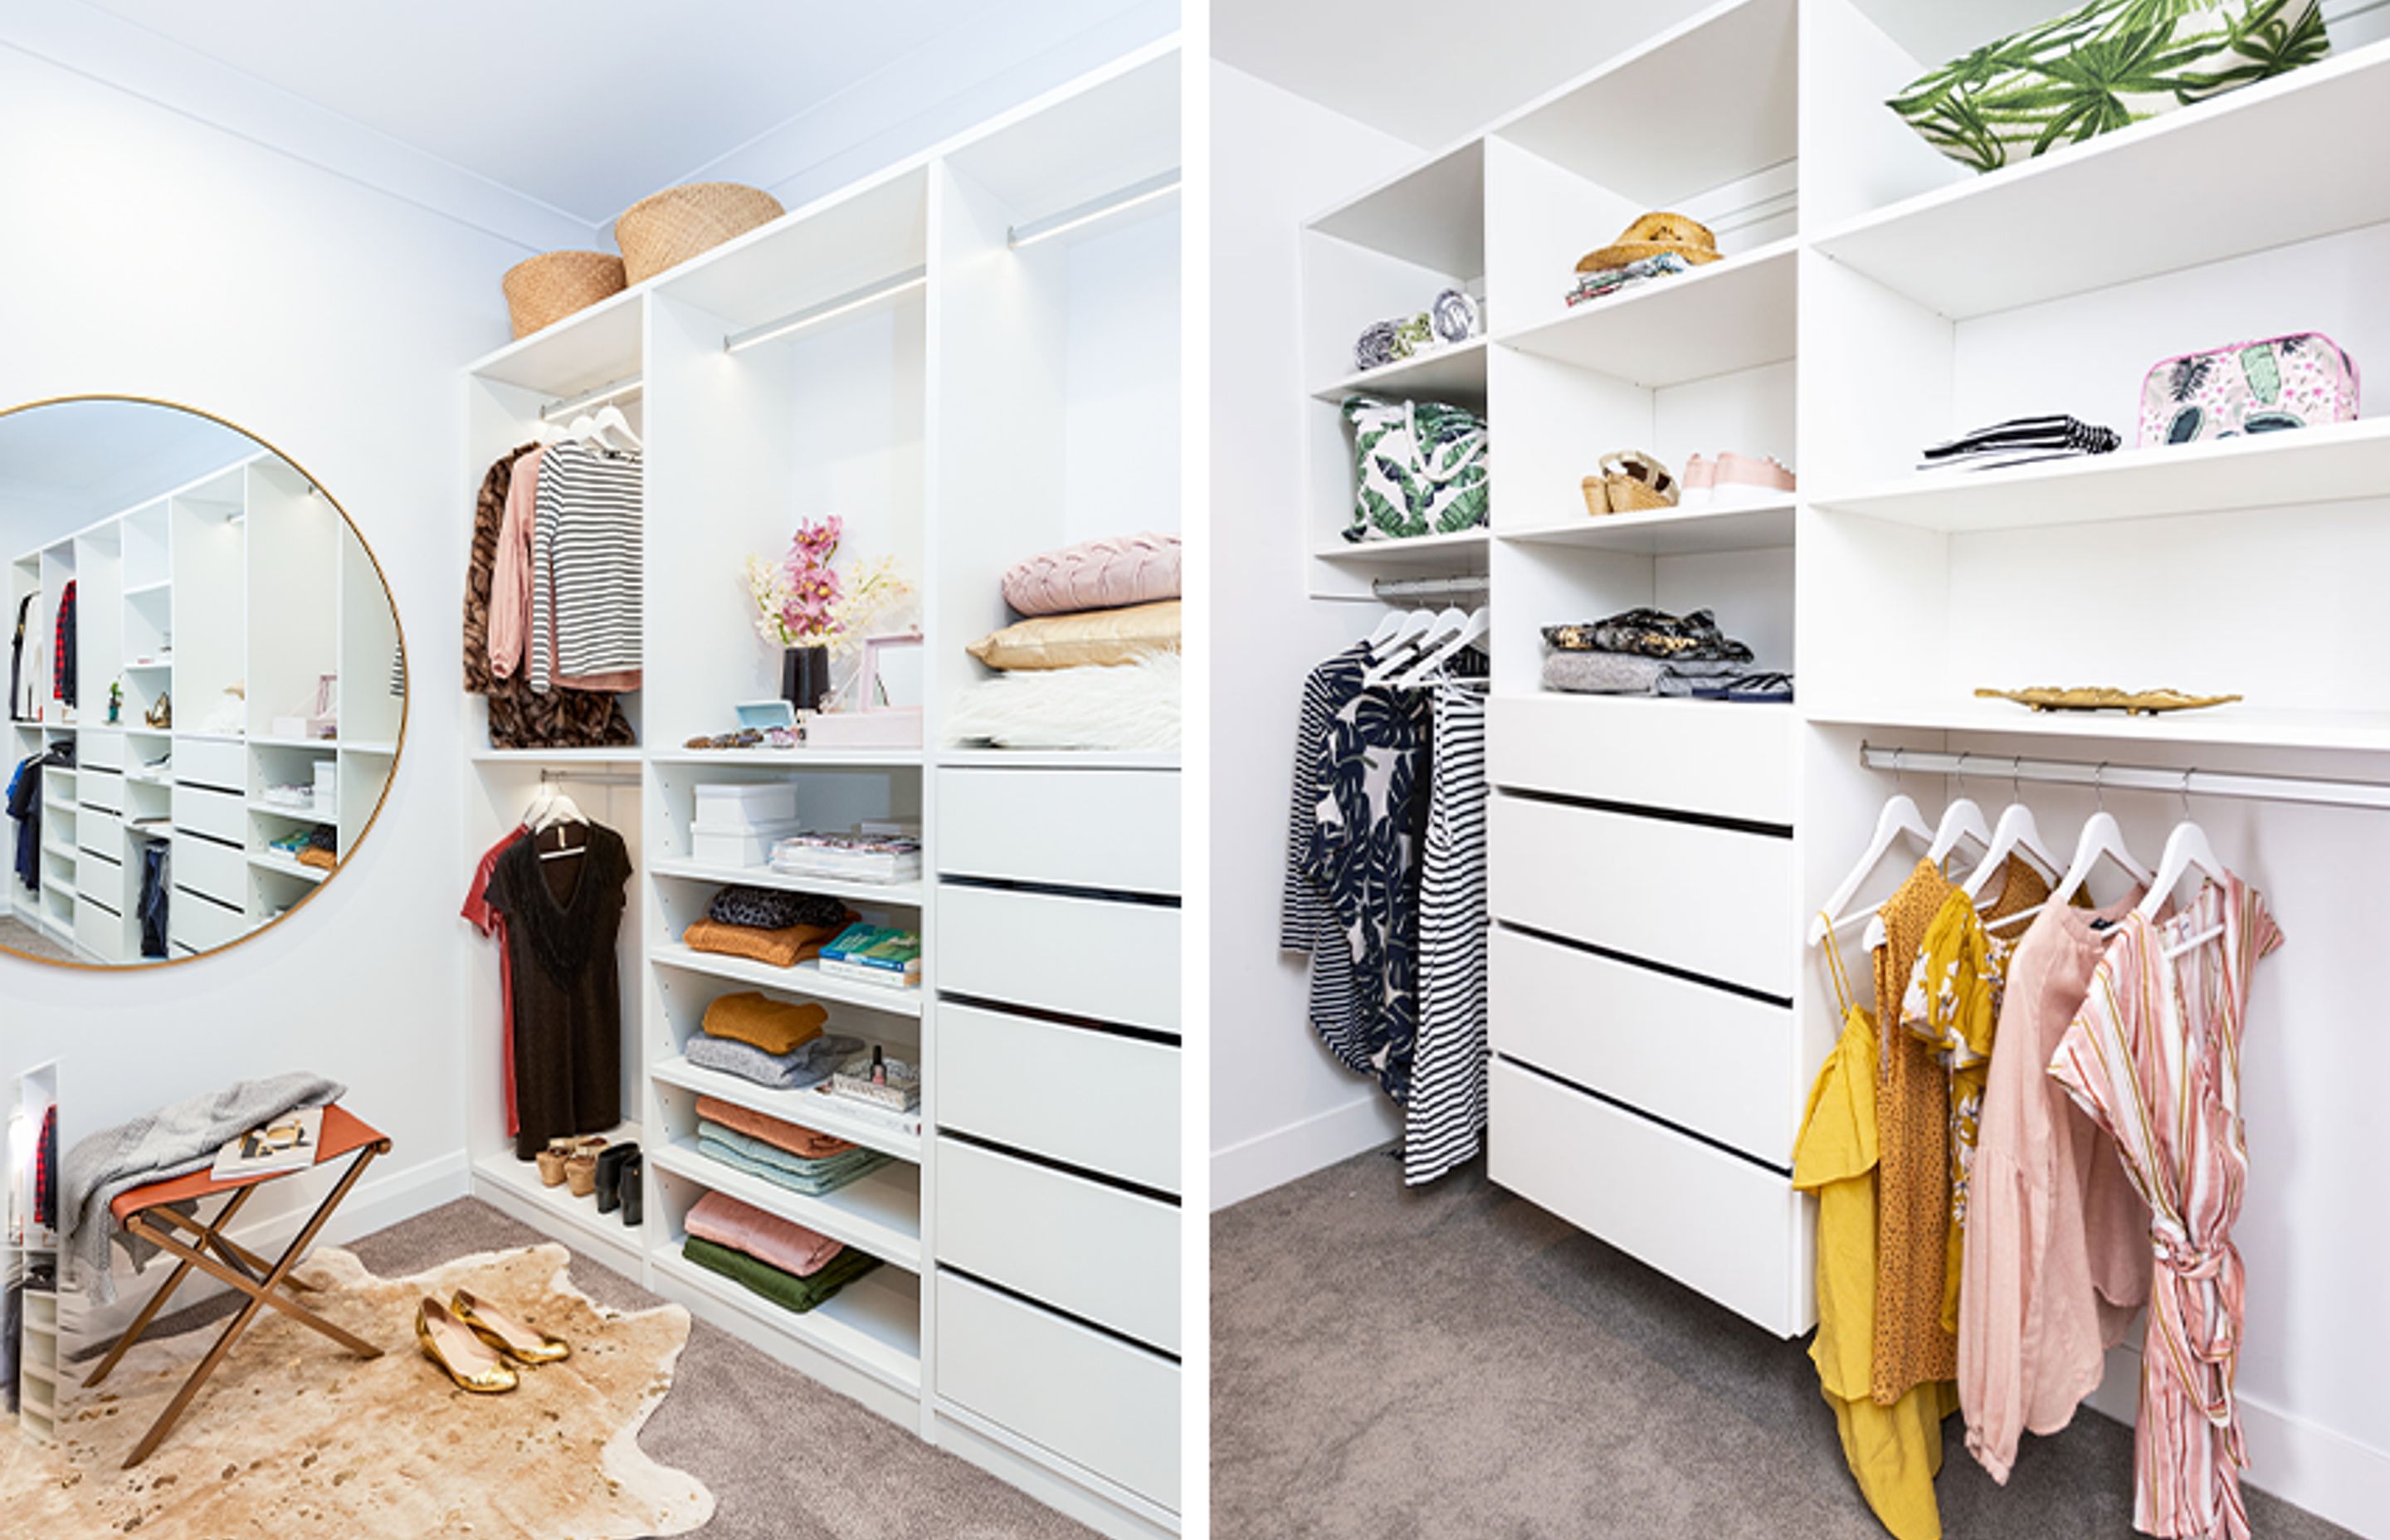 Create the perfect custom wardrobe for your needs with a mix of tall, short and medium hanging spaces, drawers and open shelving for total convenience.